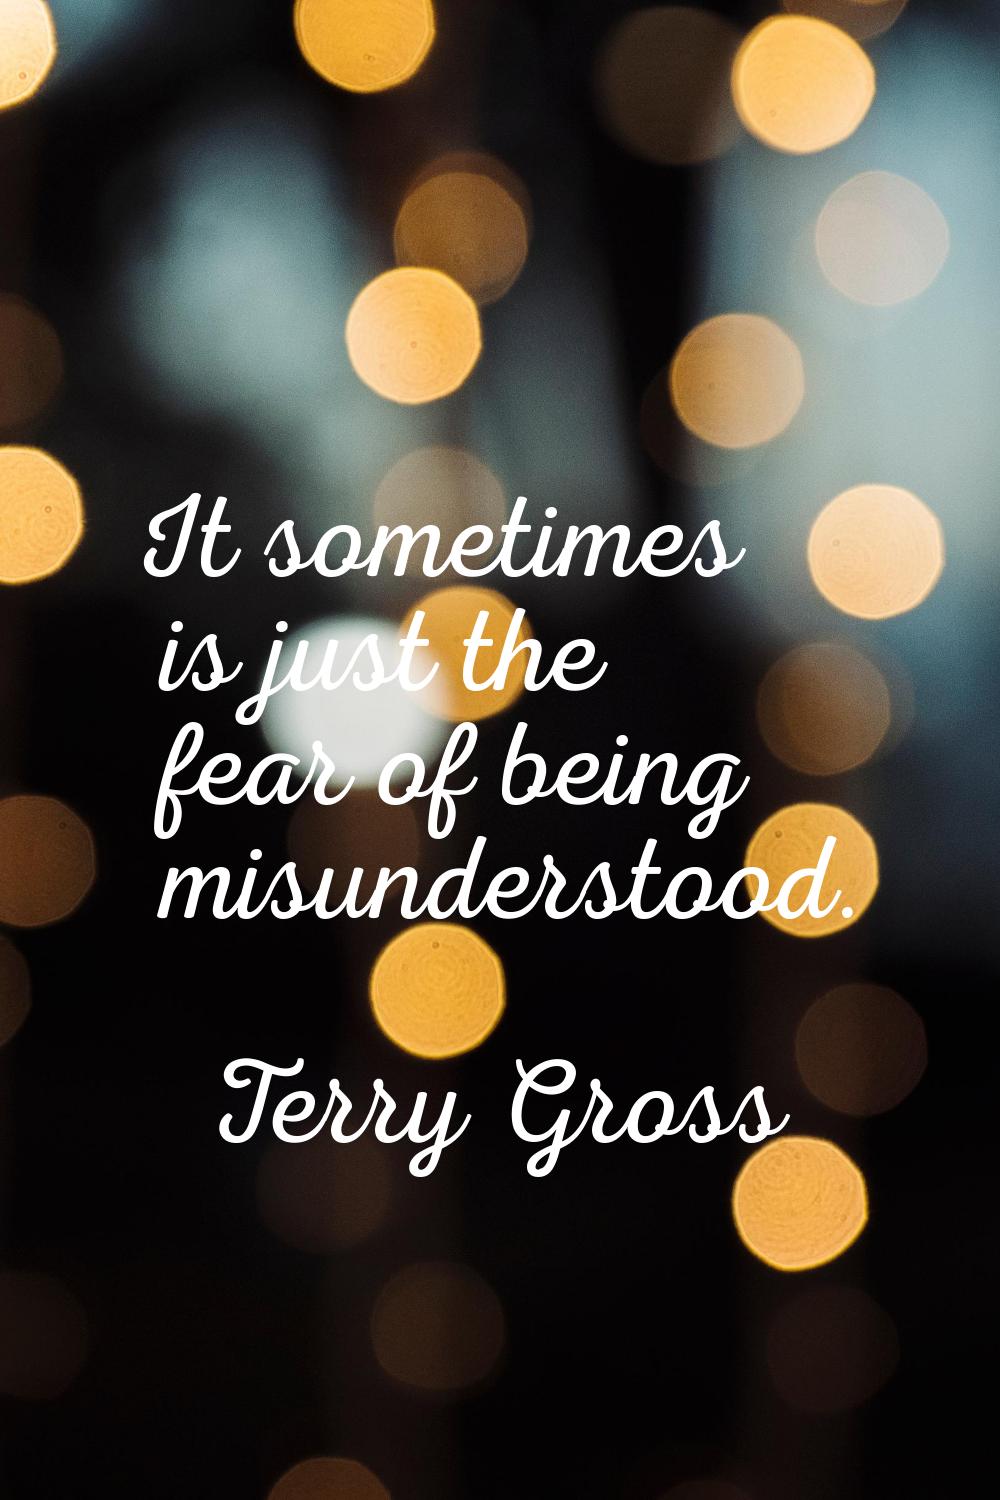 It sometimes is just the fear of being misunderstood.